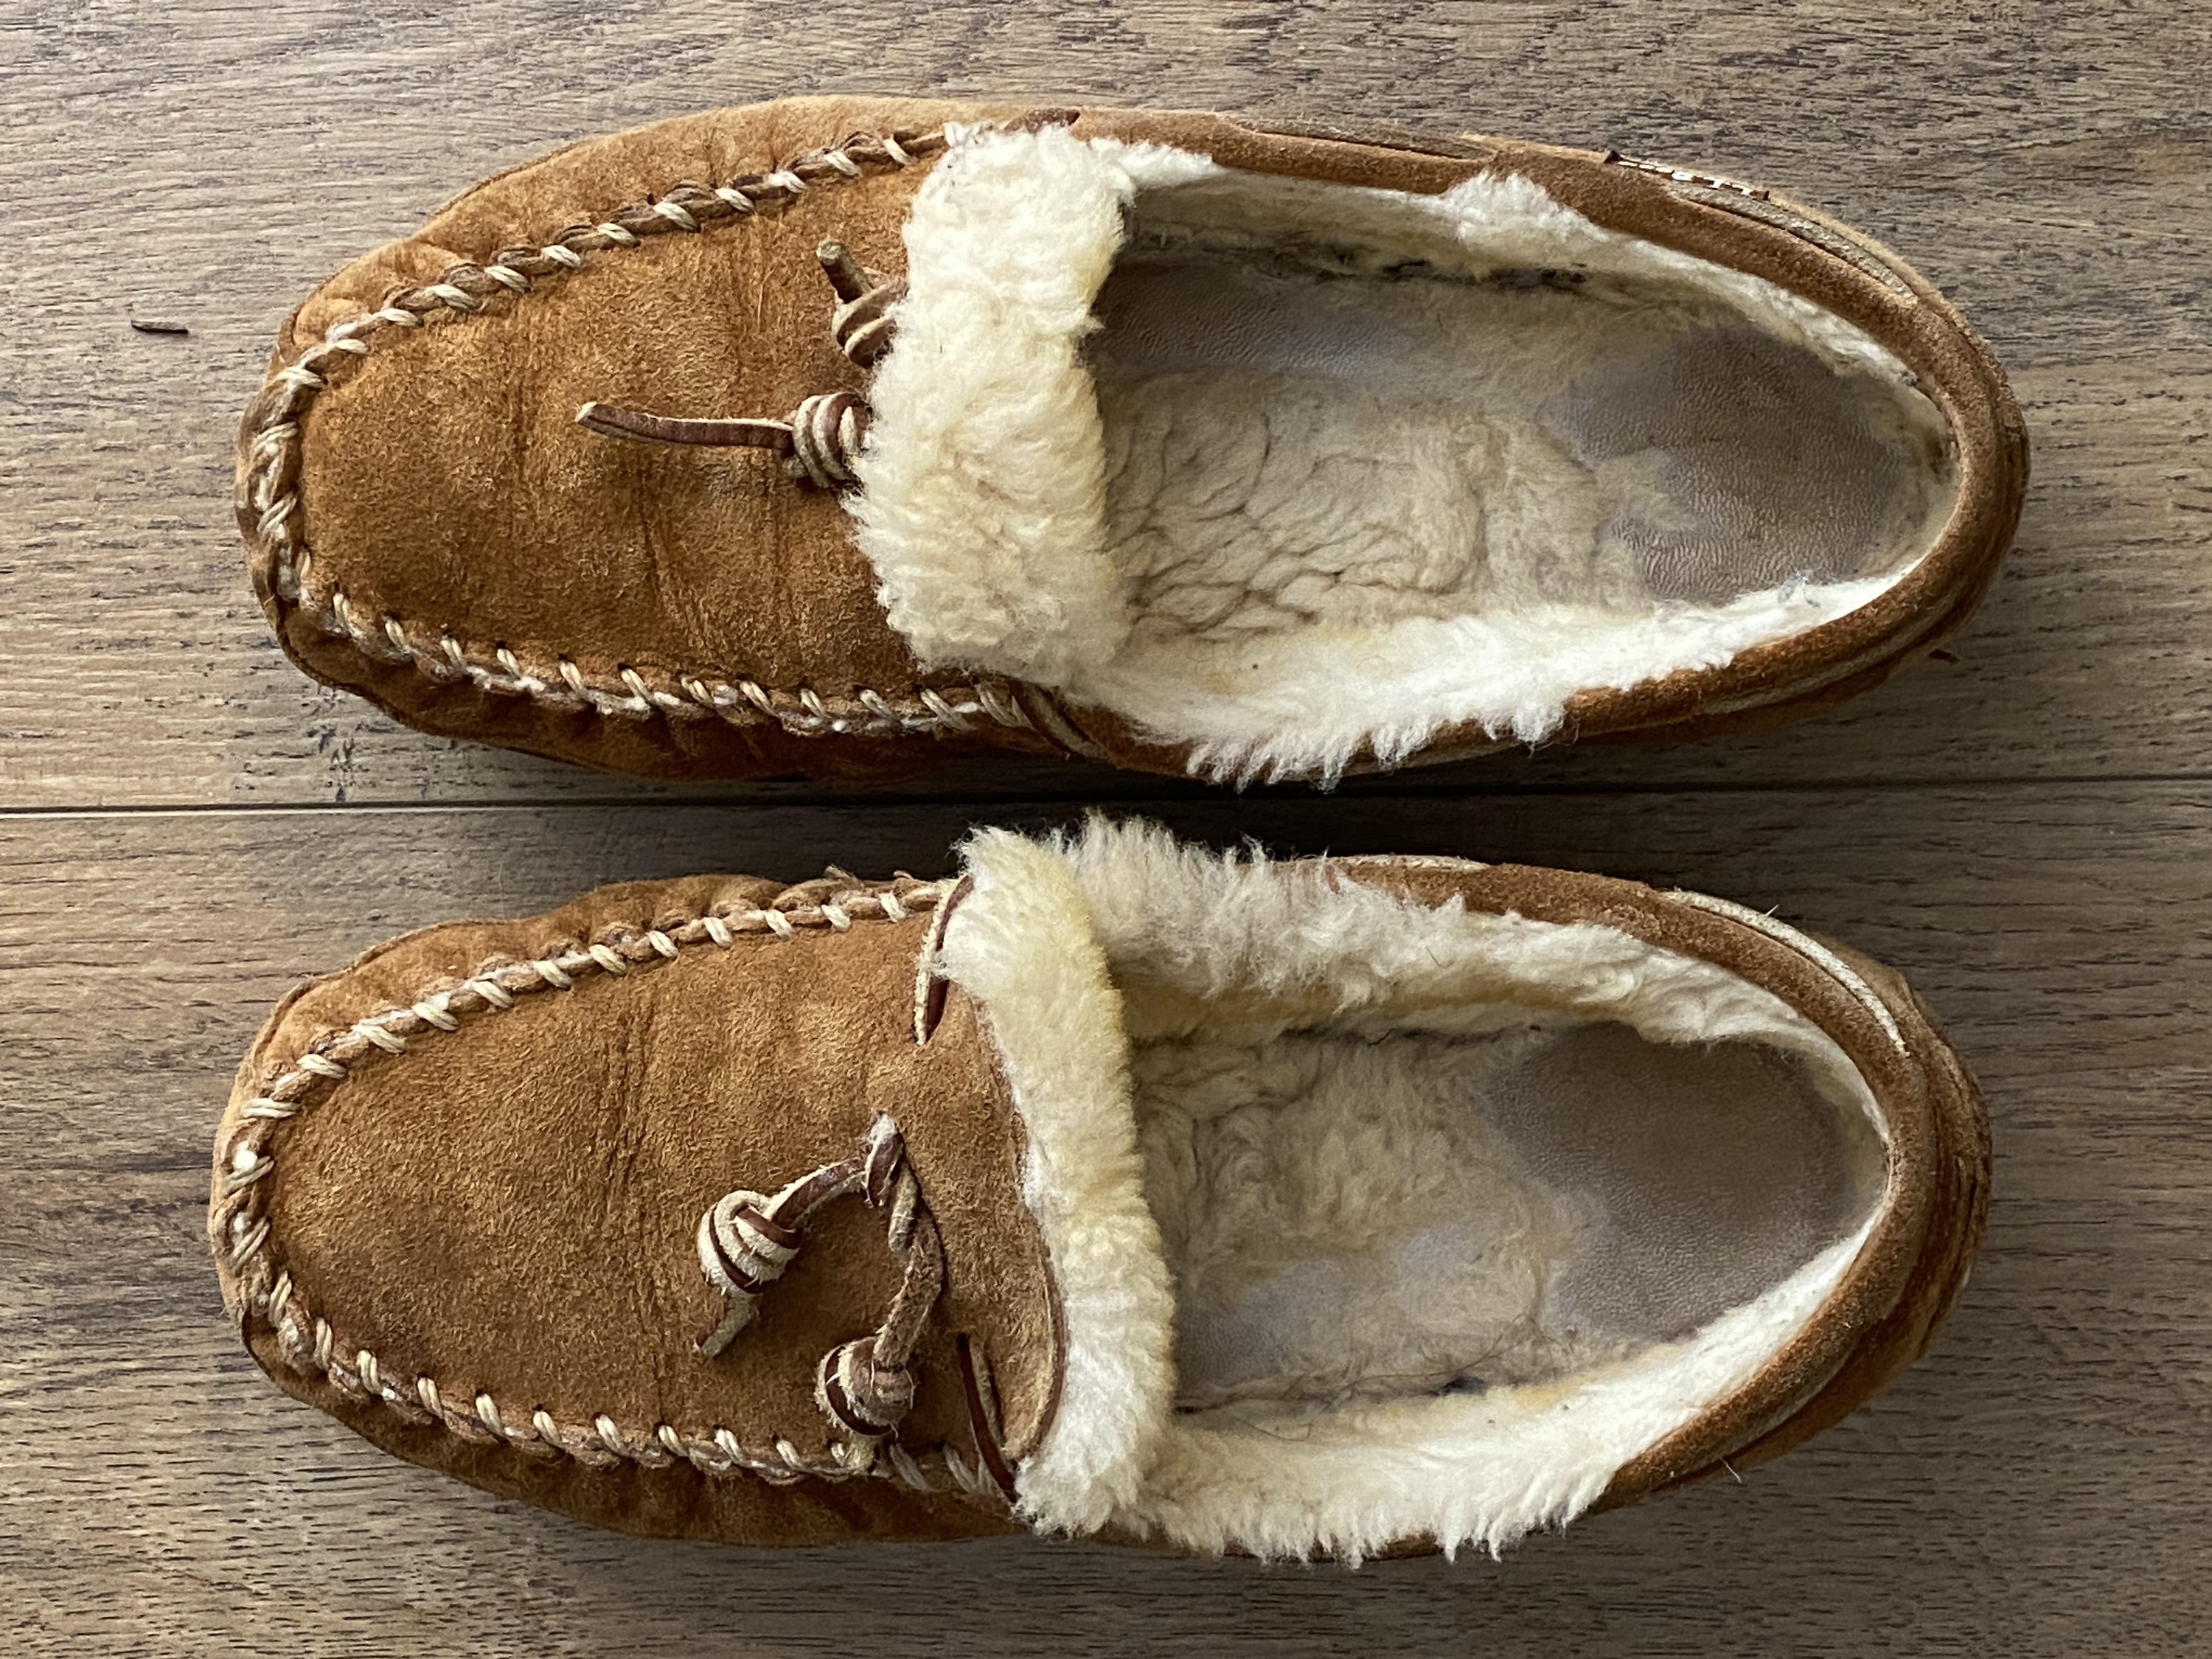 ll bean wicked good slippers review